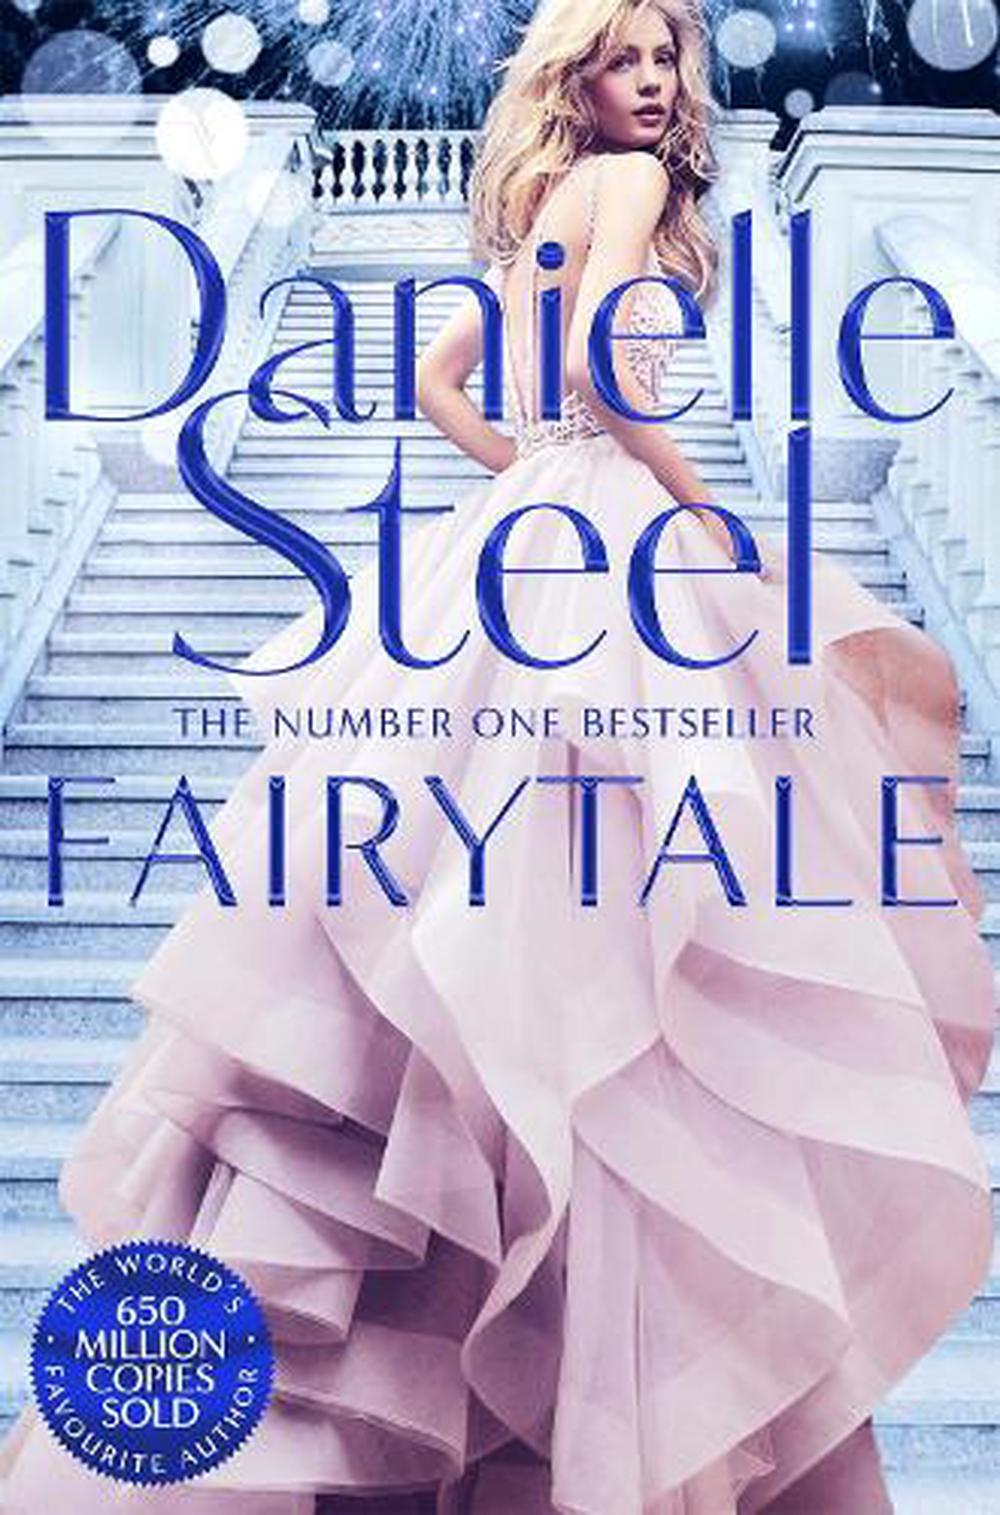 Fairytale by Danielle Steel (English) Paperback Book Free Shipping